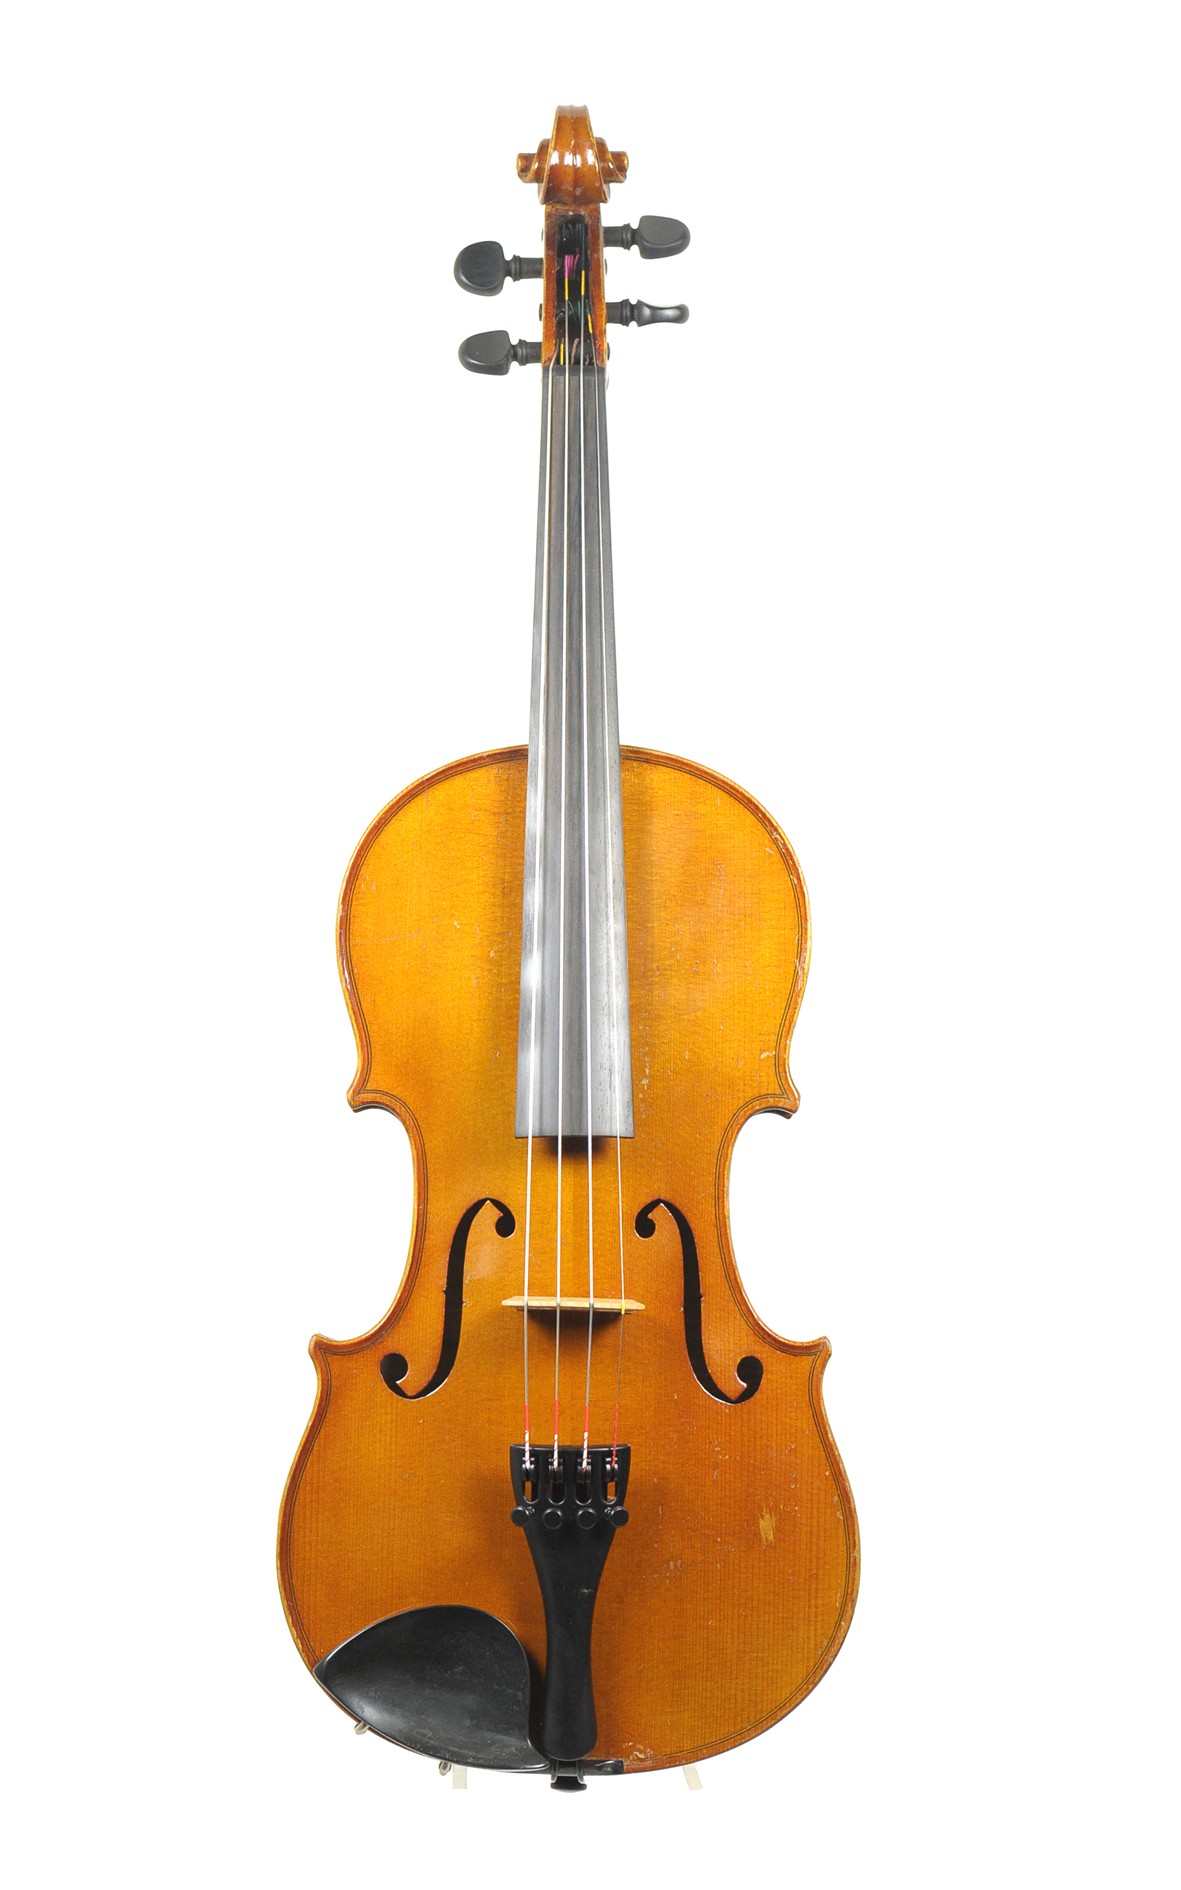 3/4 violin from Saxony - front view